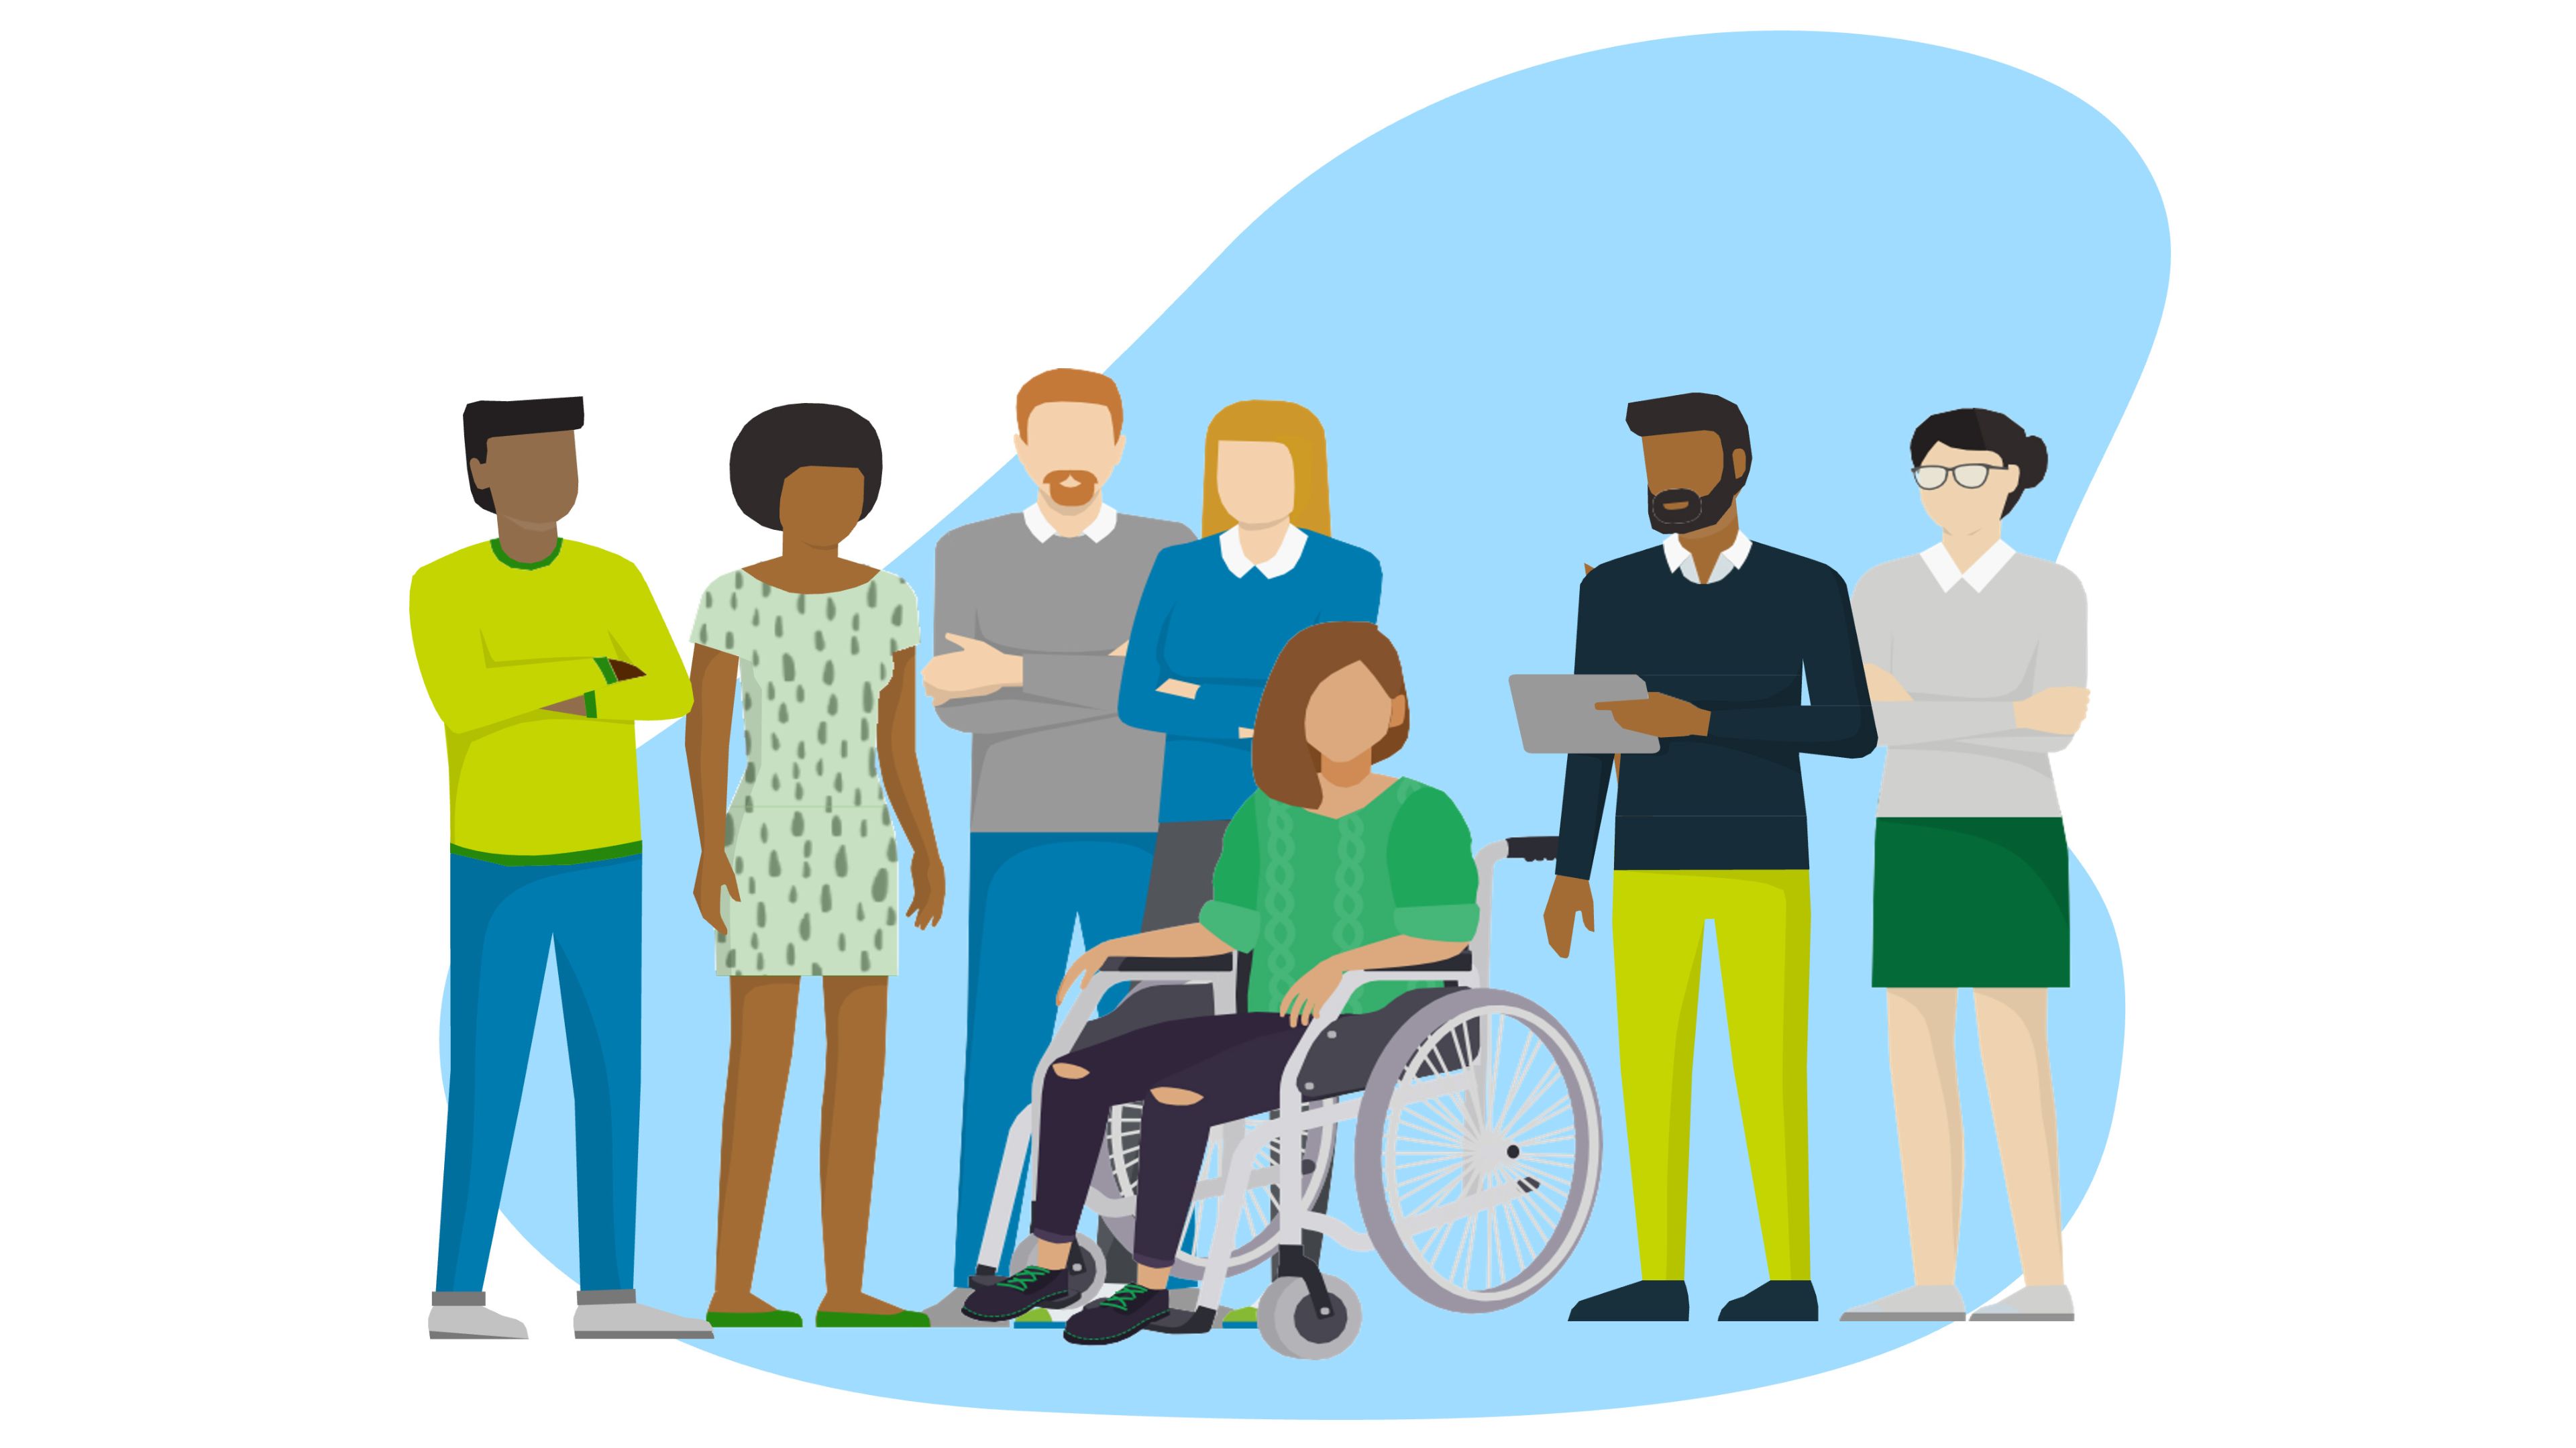 Illustration showing a number of professionals in different clothing, ethnicities and genders. One of them is in a wheelchair.